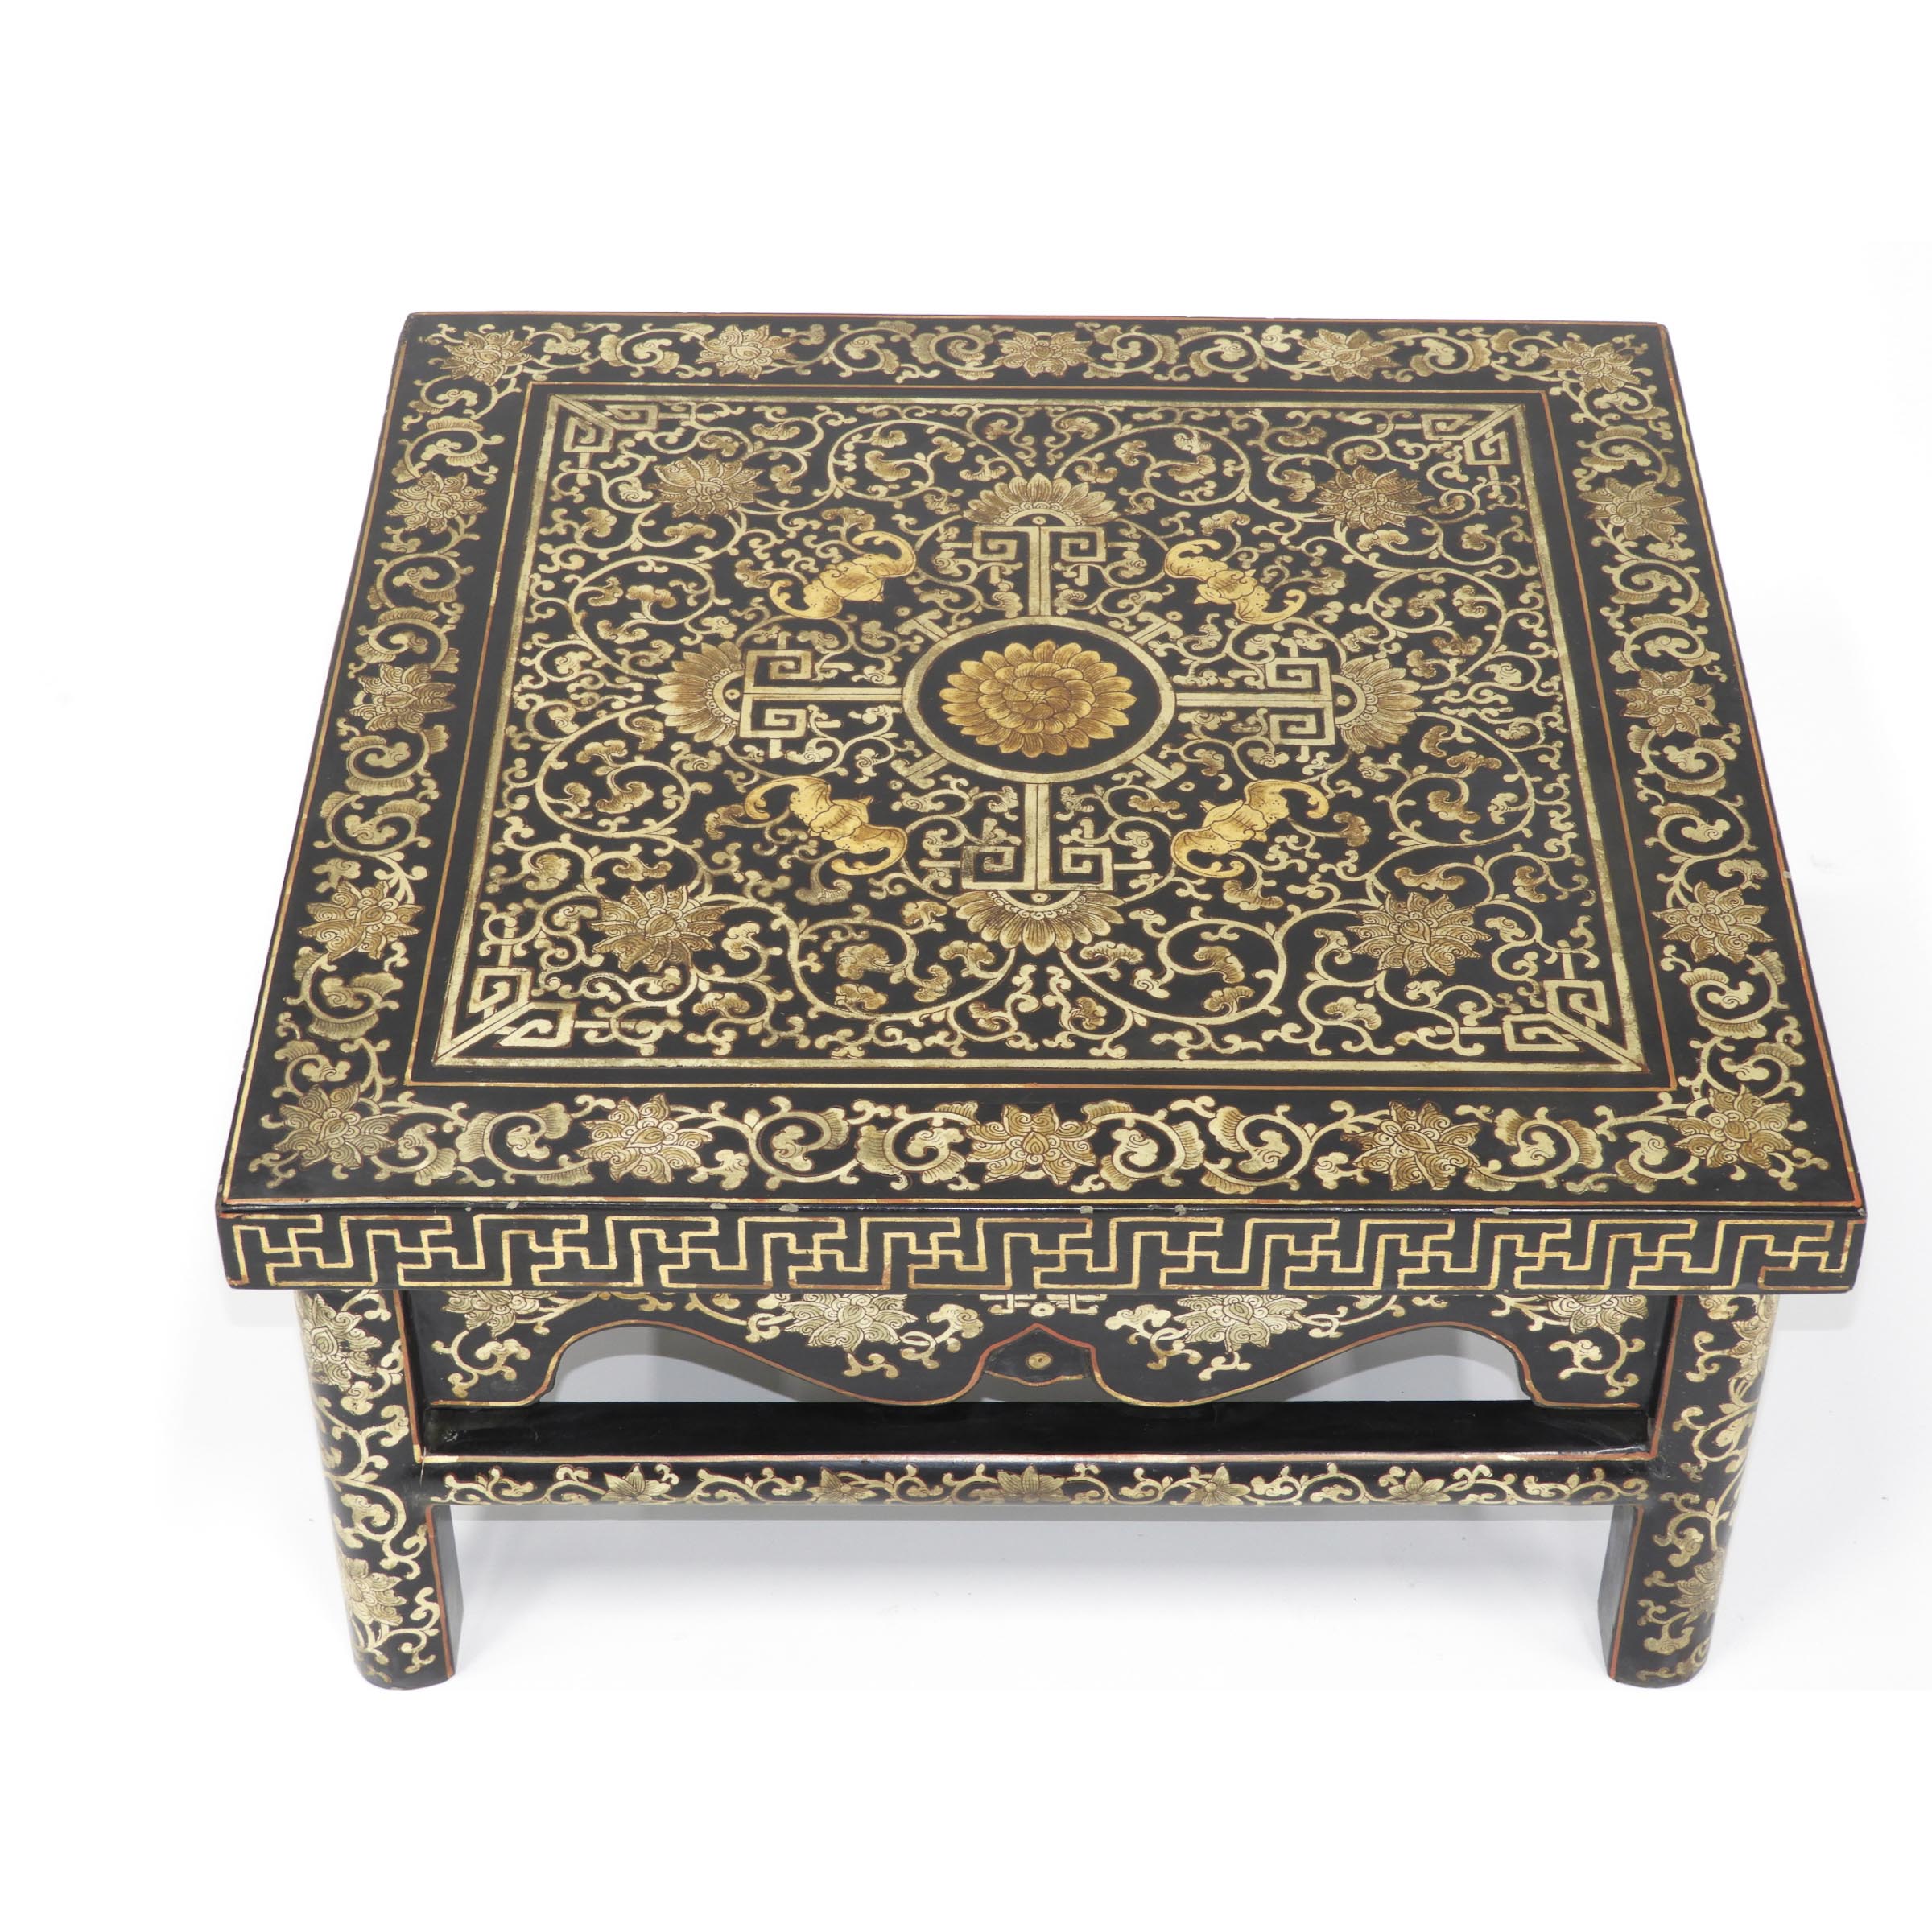 A Pair of Chinese Black Lacquer Low Square Tables